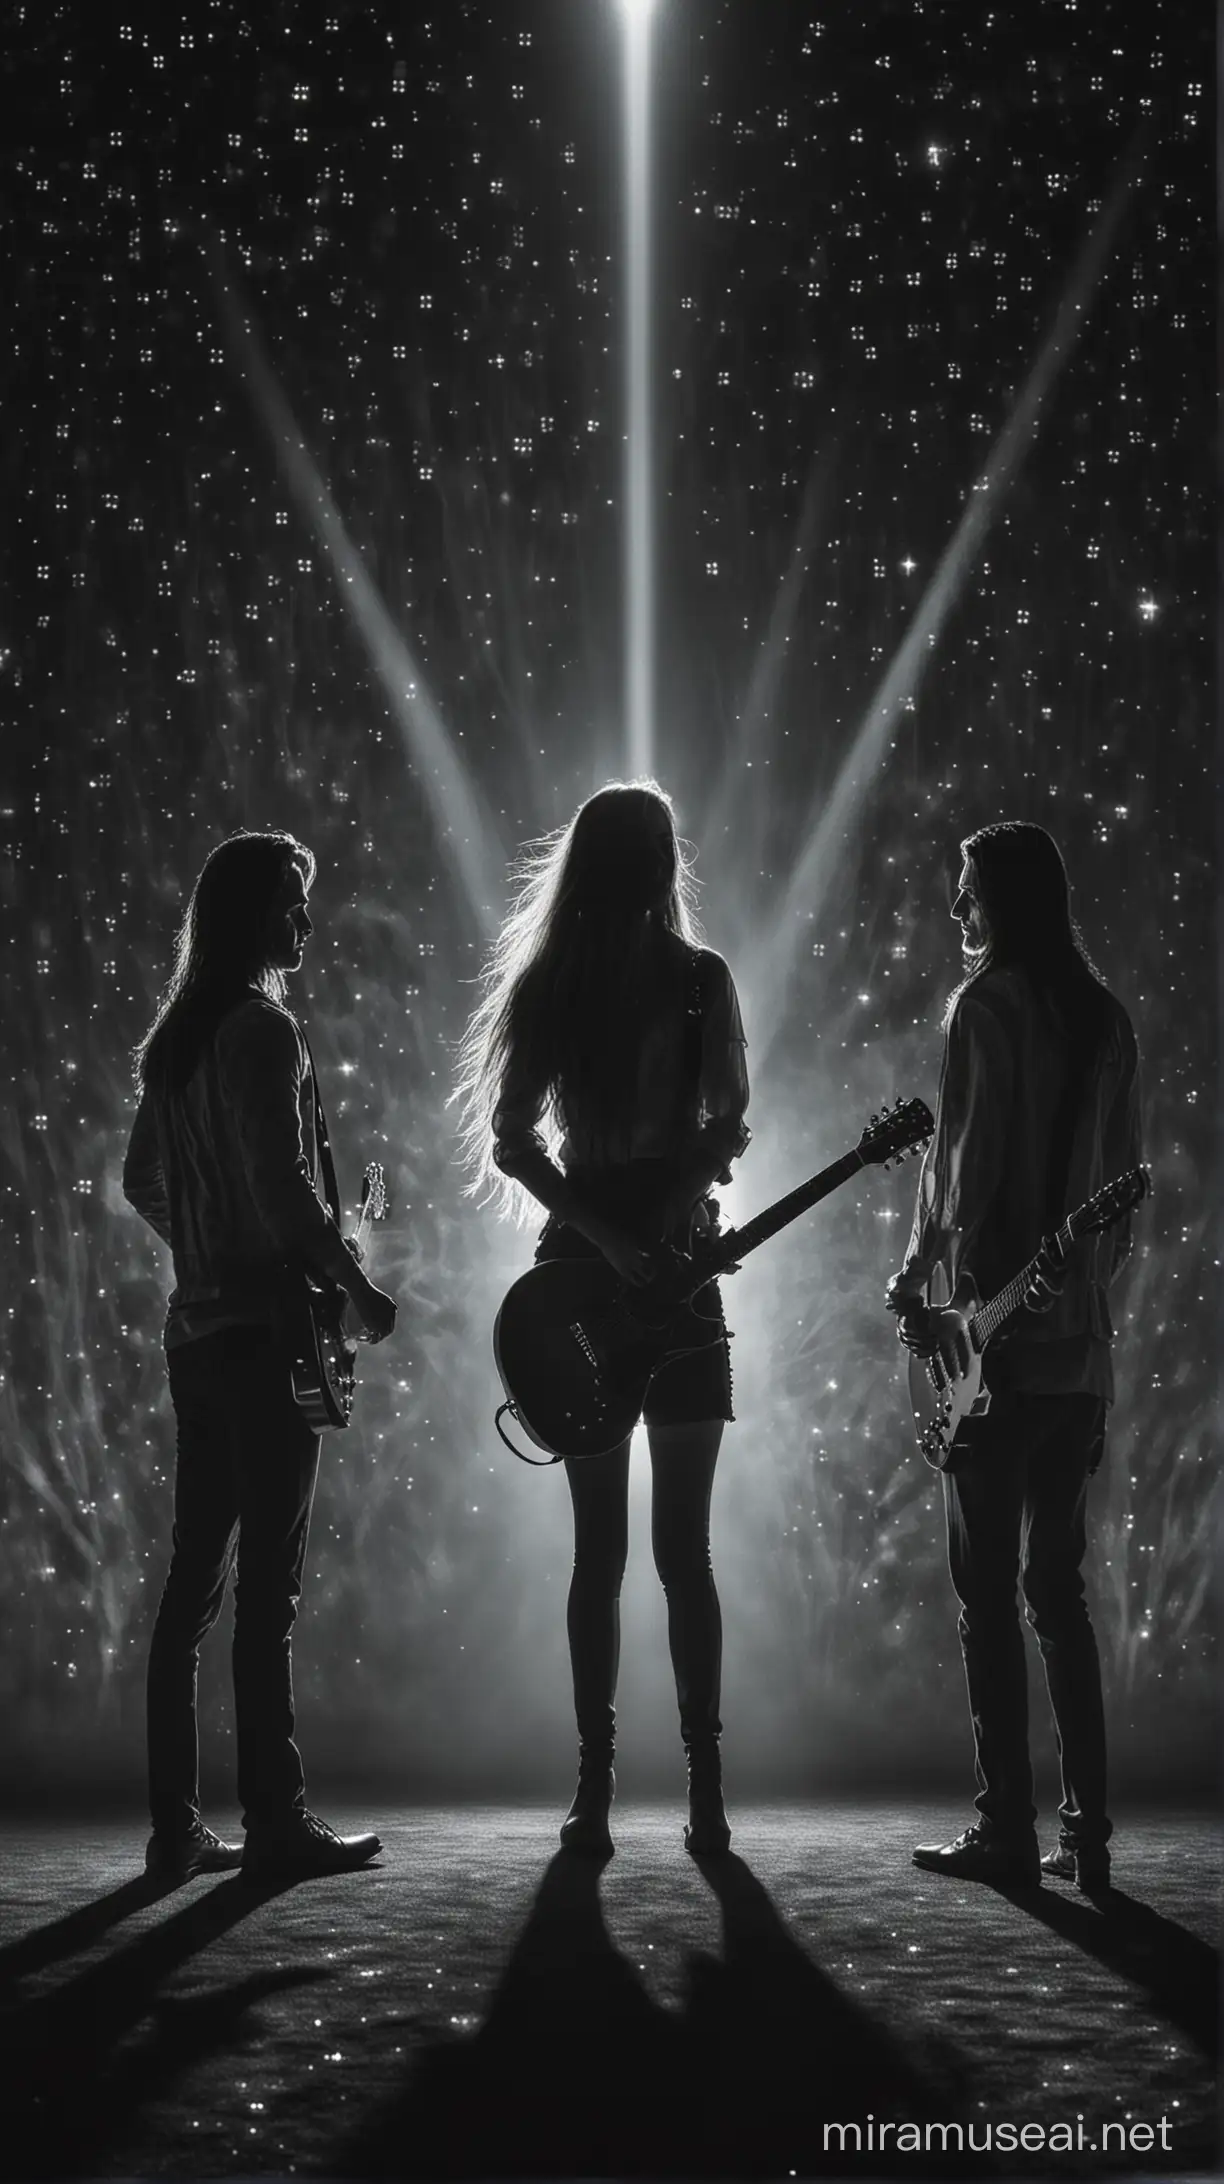 Three Musicians with Guitars Against a Starry Sky